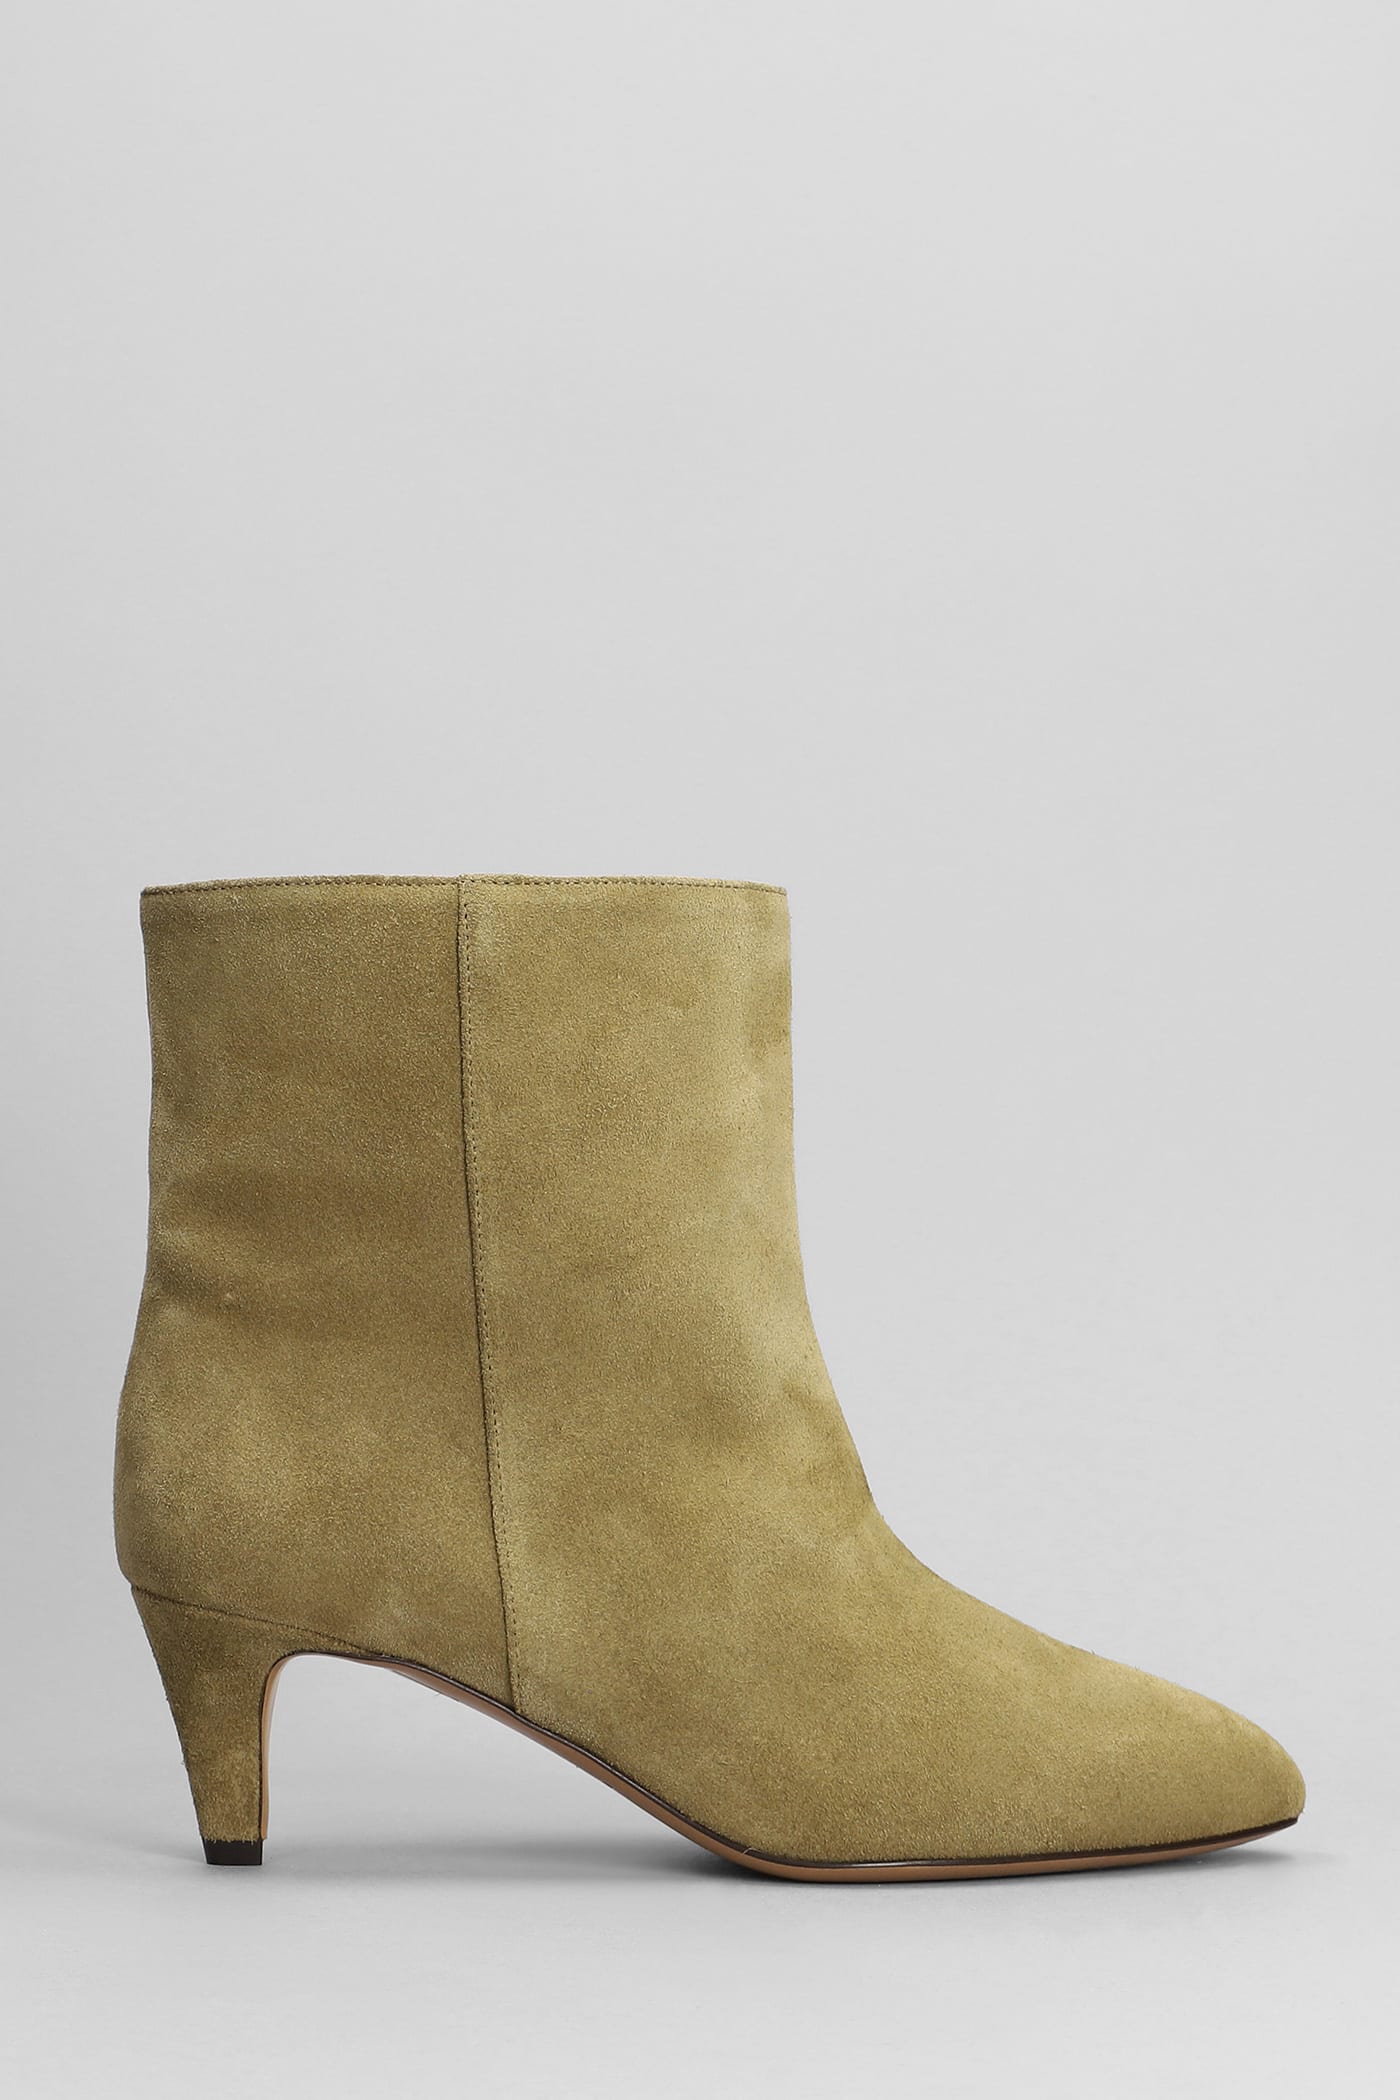 Taupe Suede Daxi Boots